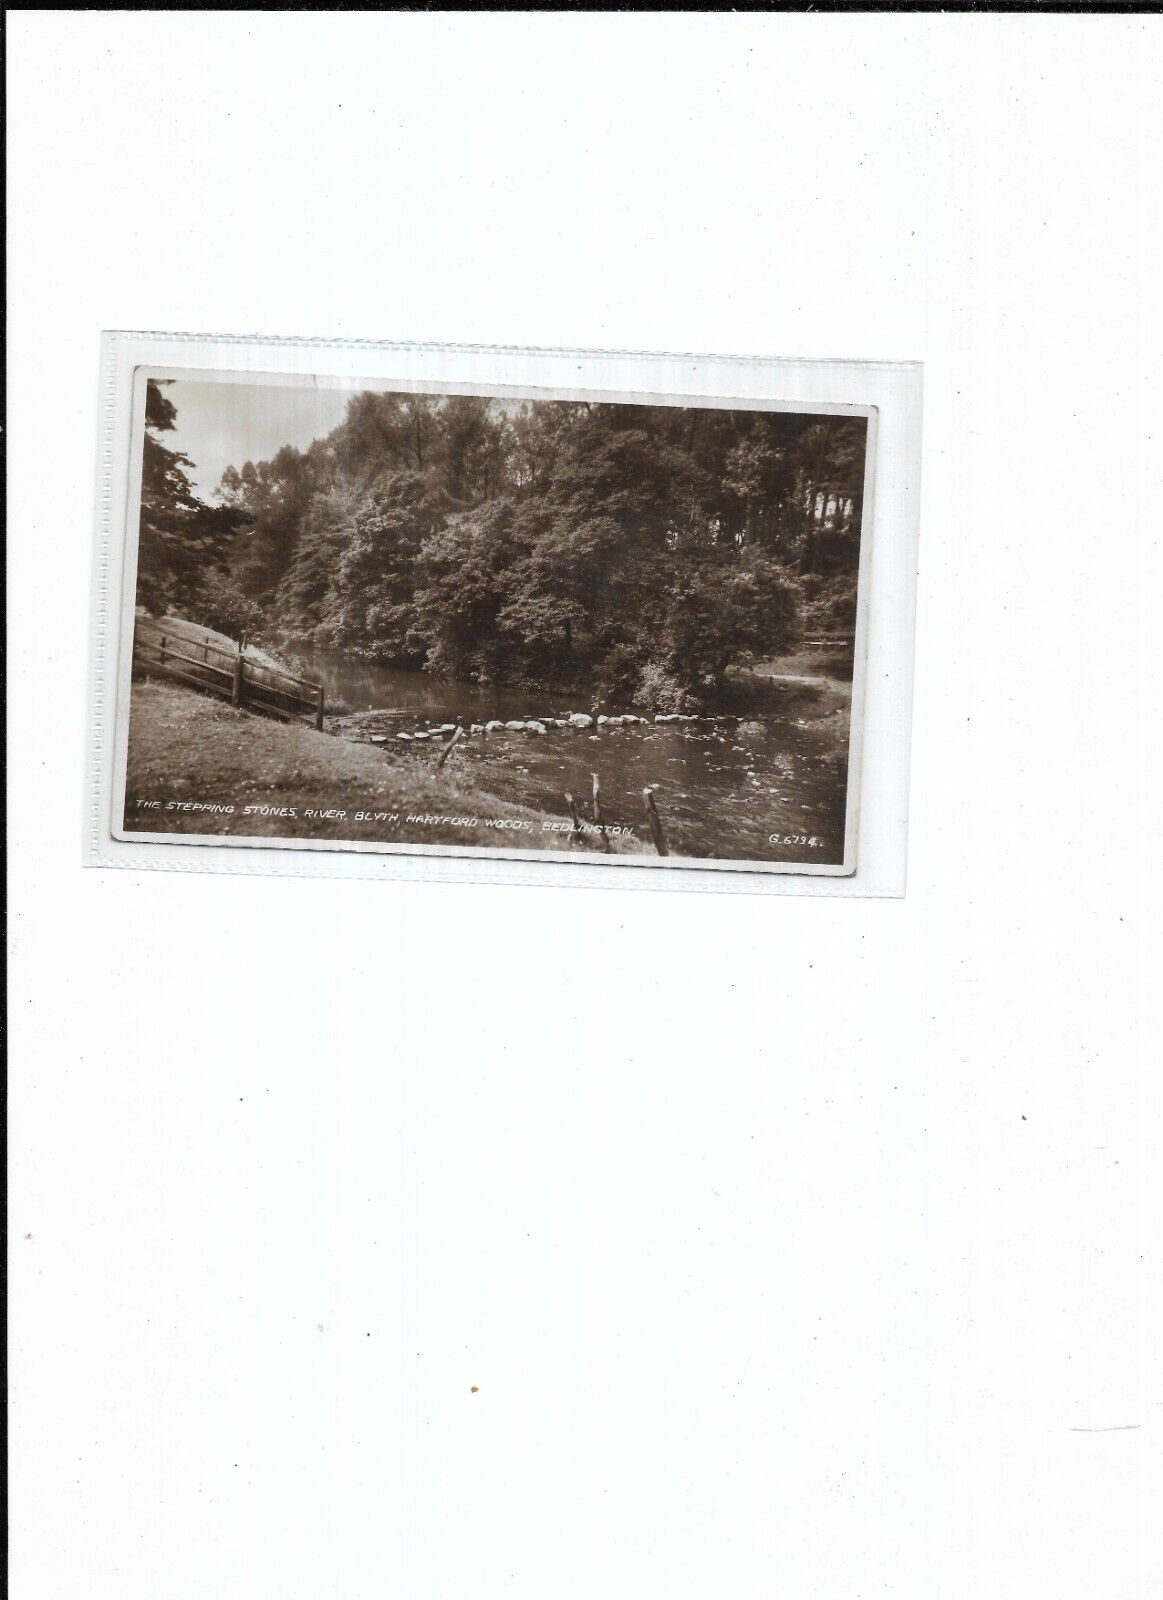 House Clearance - RP Northumberland Service G.6794 "Stepping Stones, Hartford Woods" Date unknown